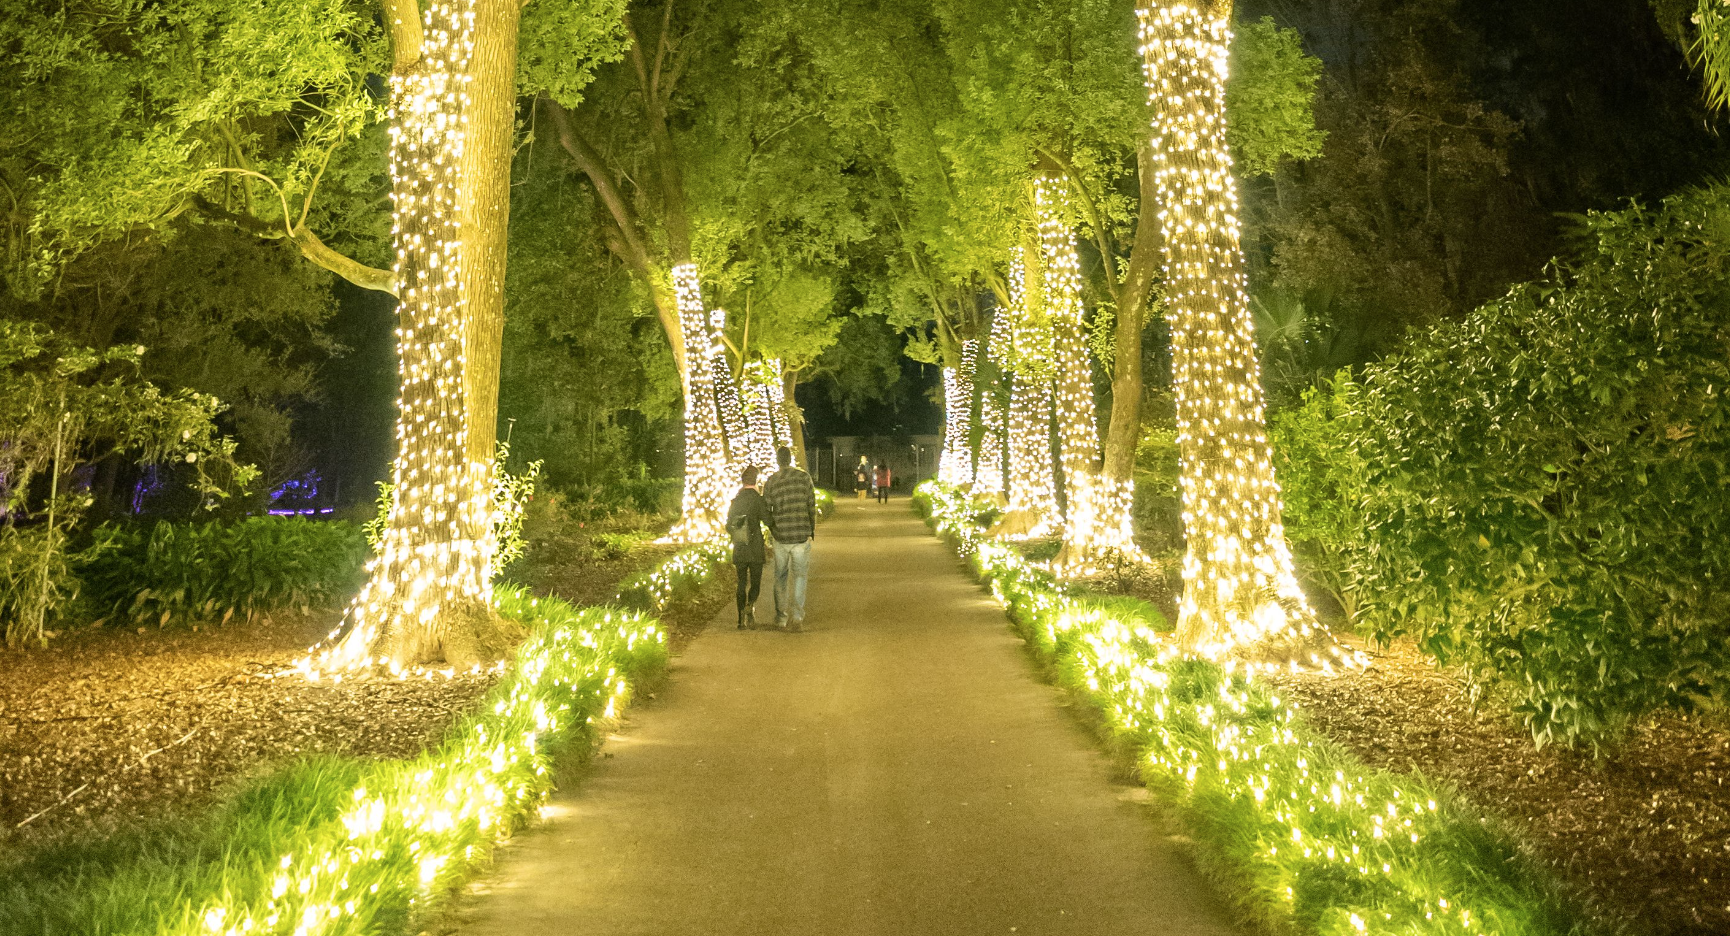 Where to see Christmas lights in Orlando: image of beautiful holiday lights on trees in Leu Gardens during Dazzling Nights